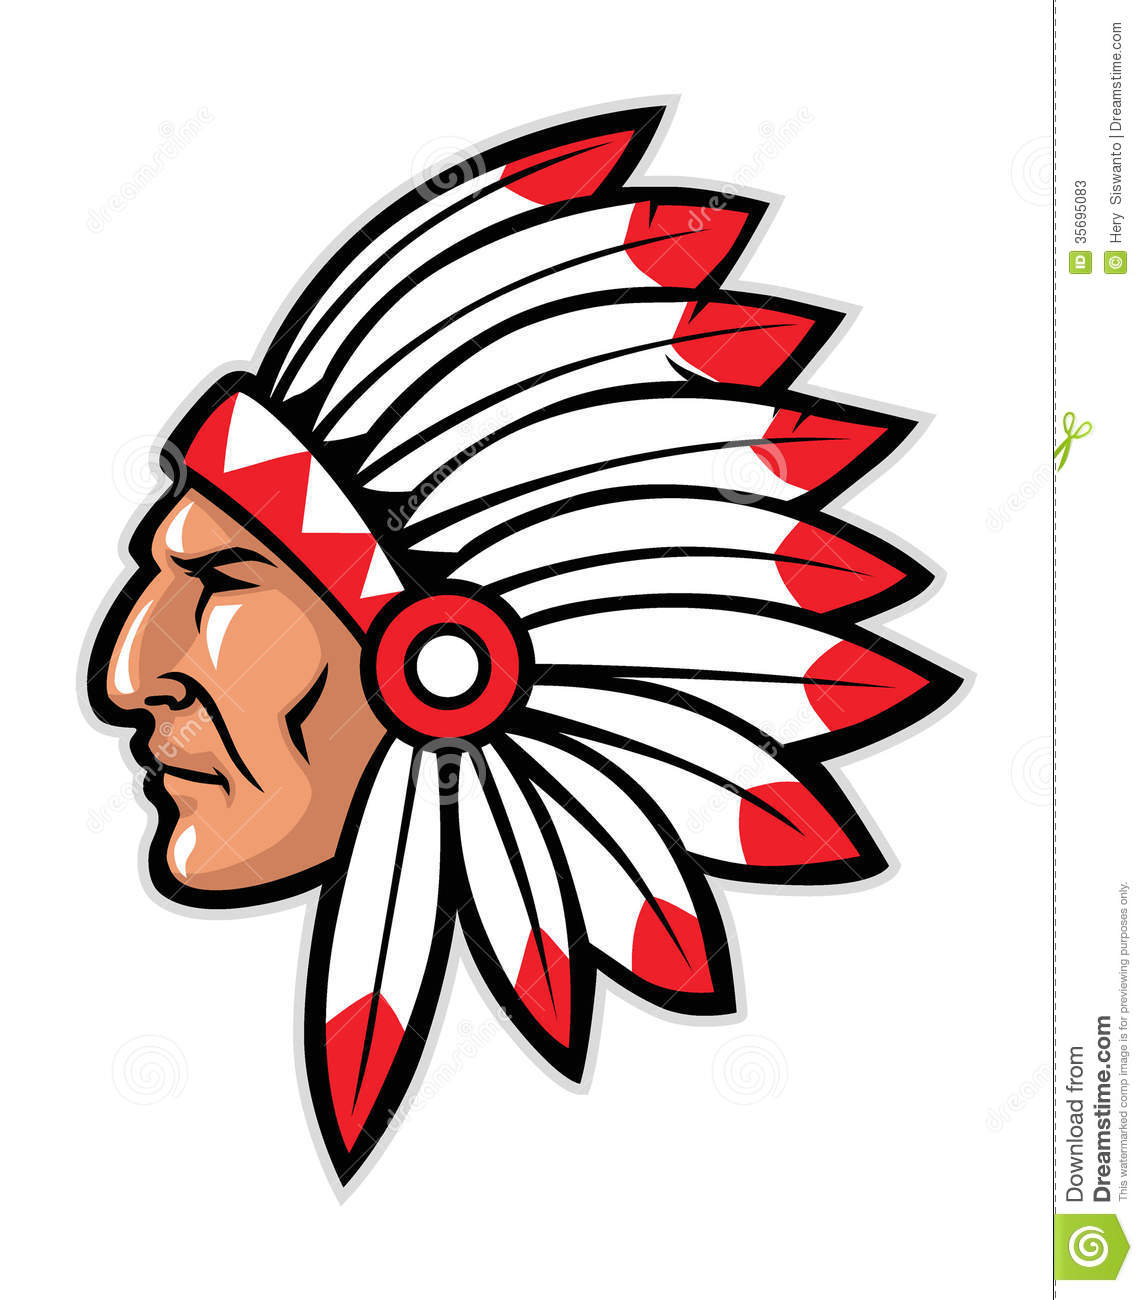 Indian Head Mascot - Clipart Indian